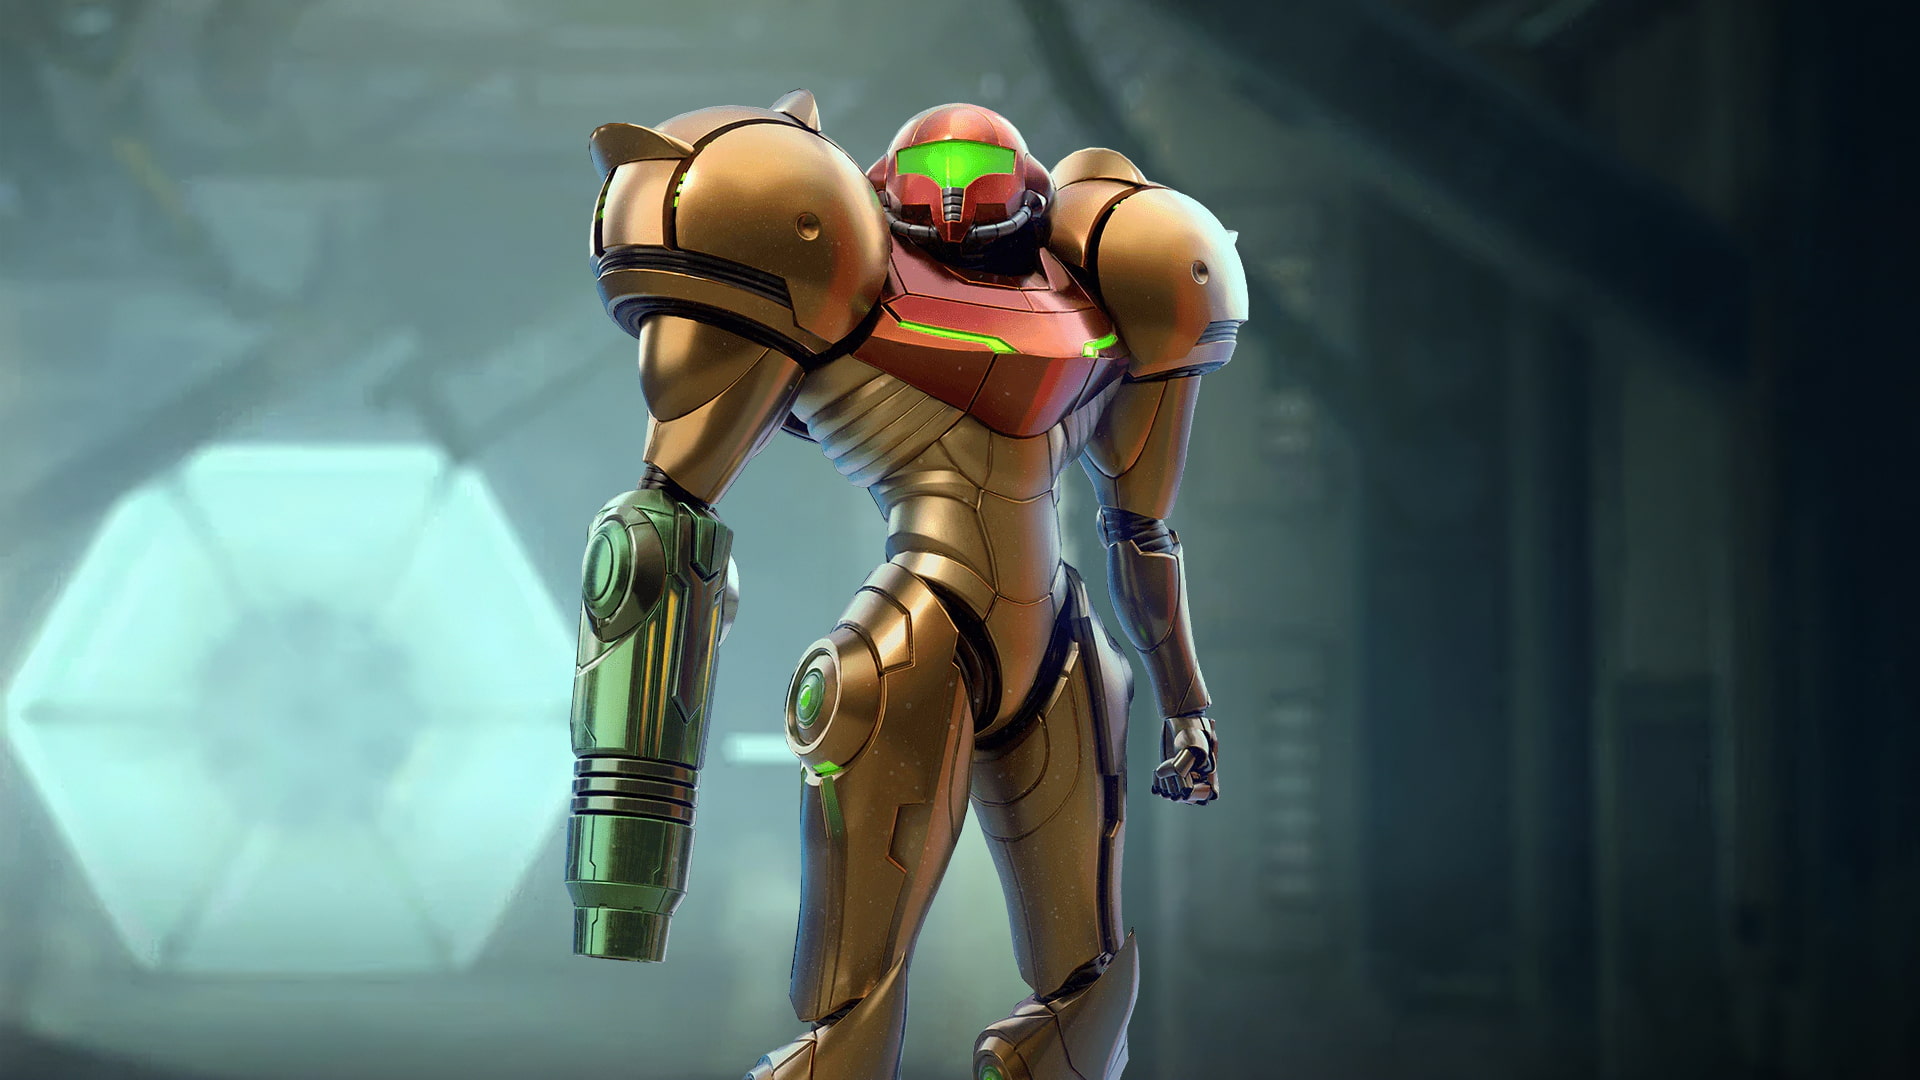 Metroid Prime Remastered compared to the original, and it's top-of